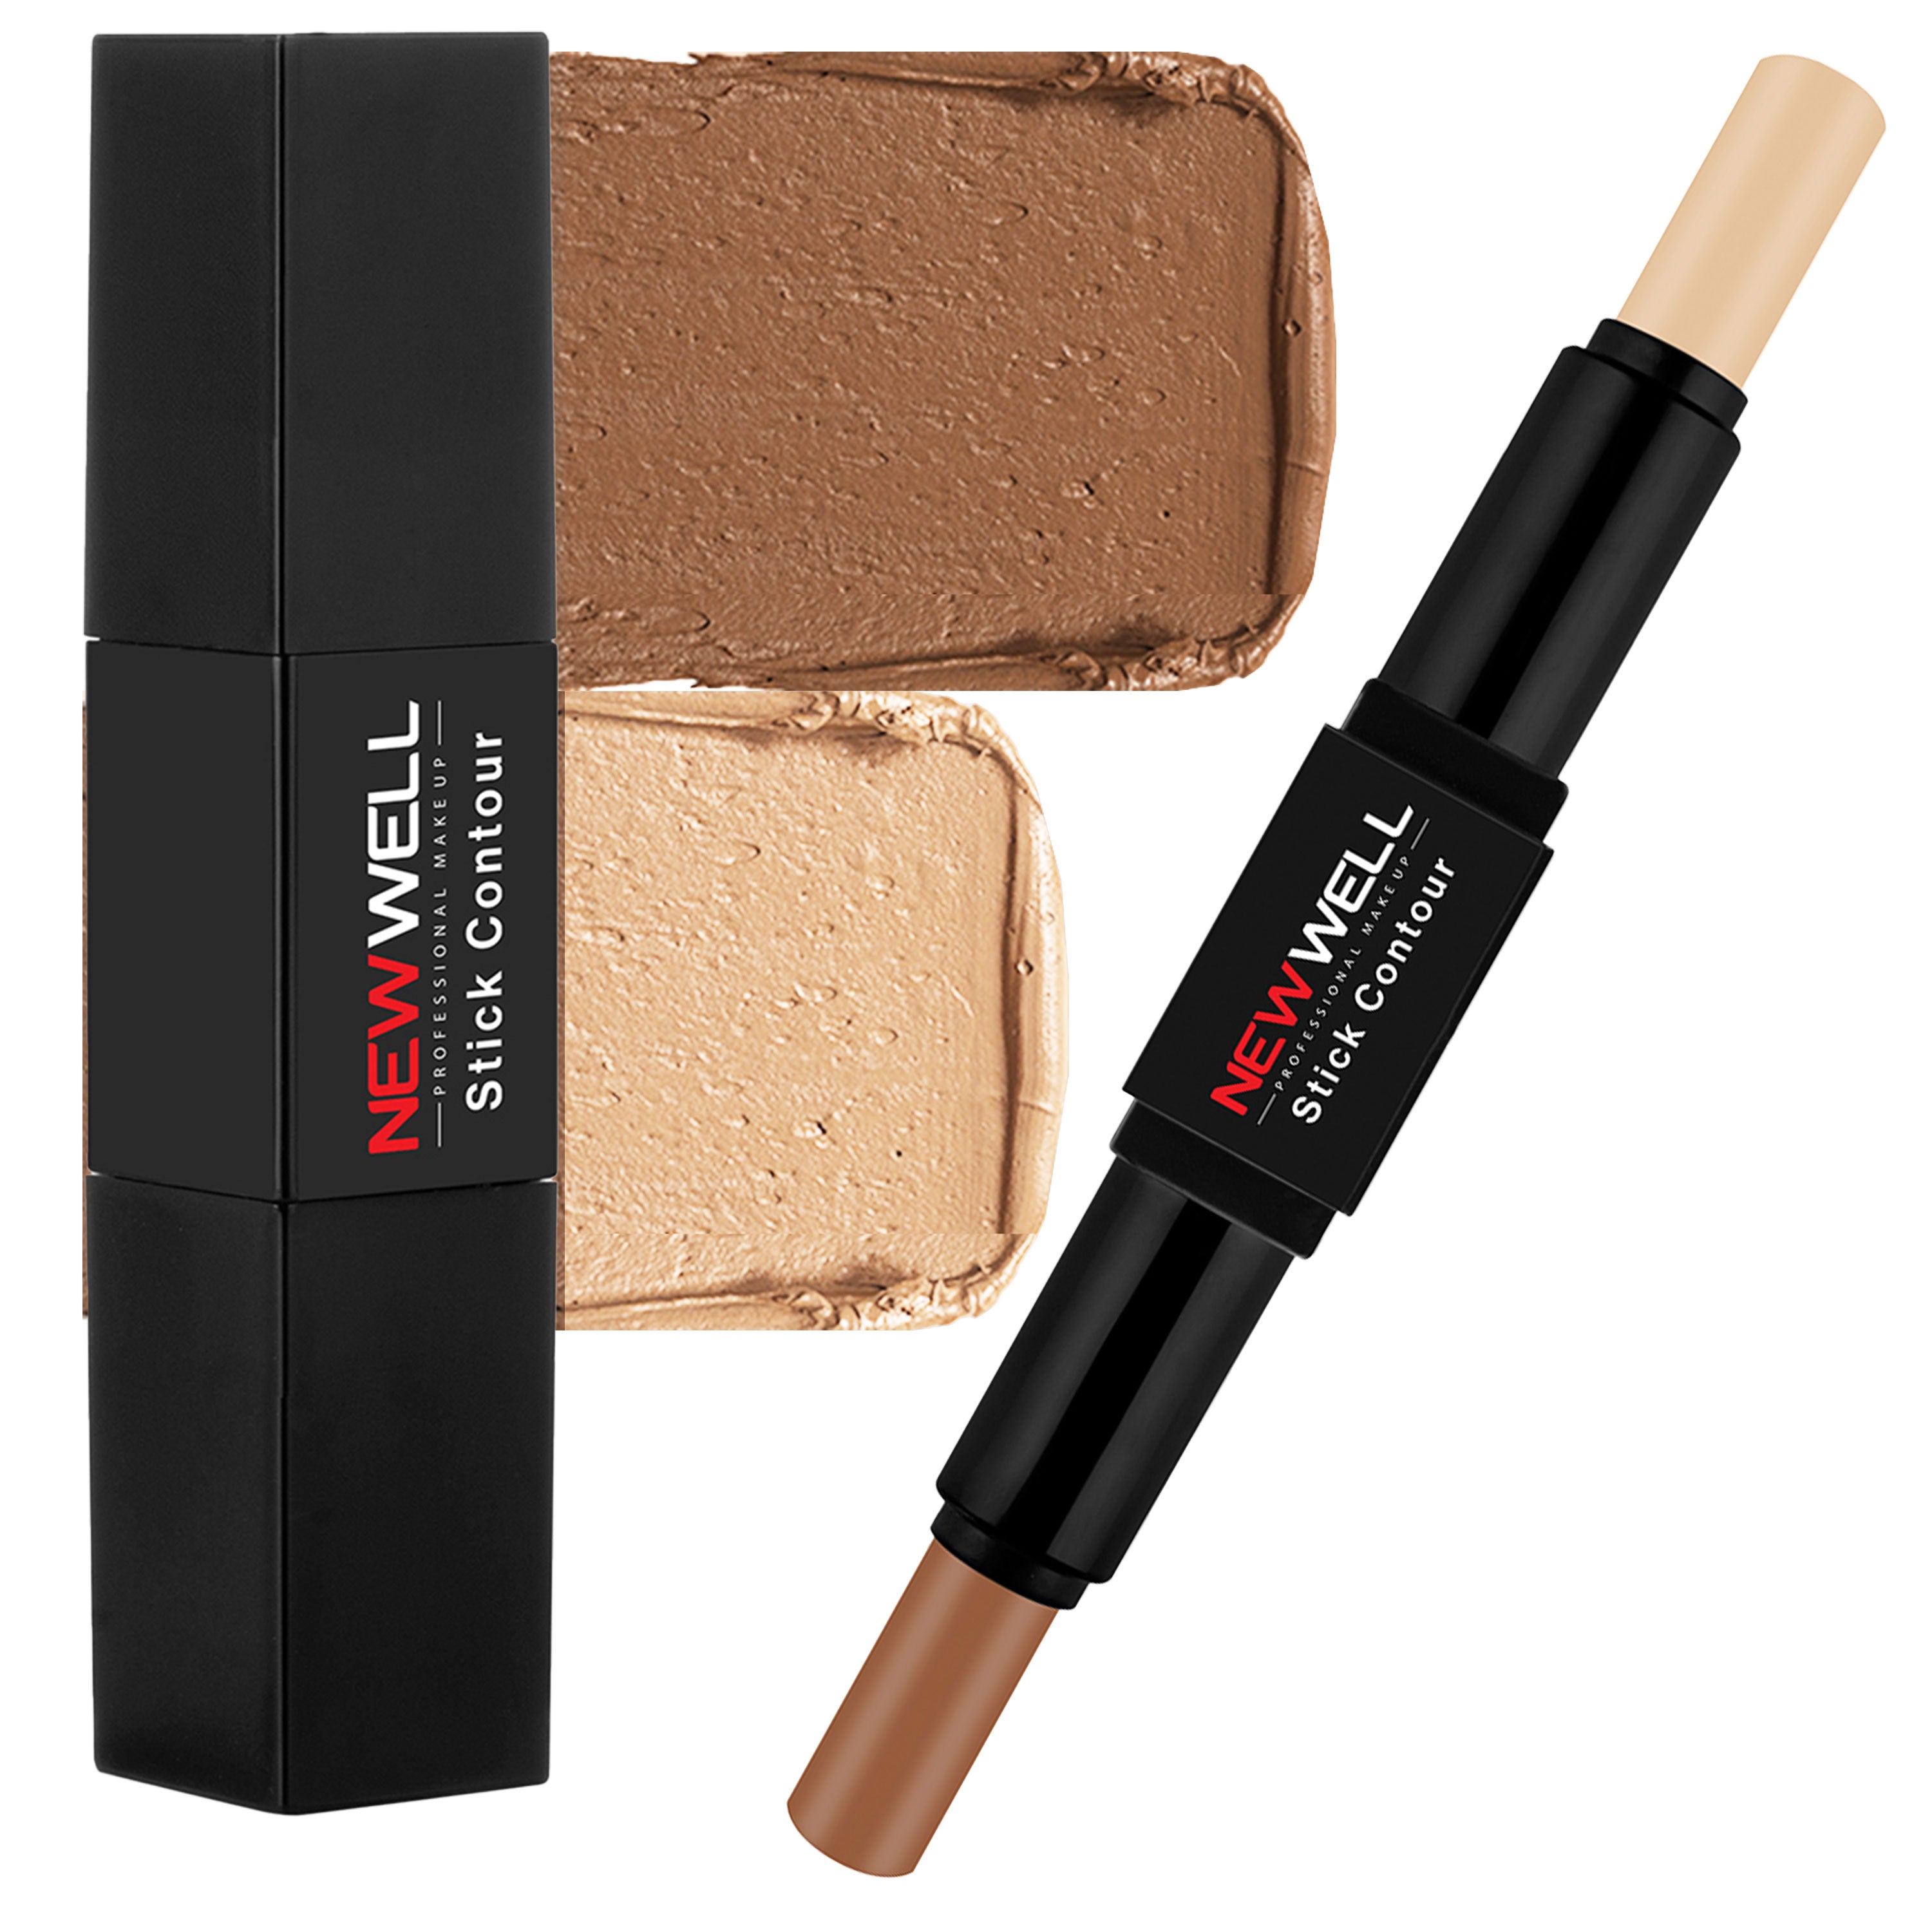 NEW WELL Highlighter & Contour Stick, Water Resistant 01